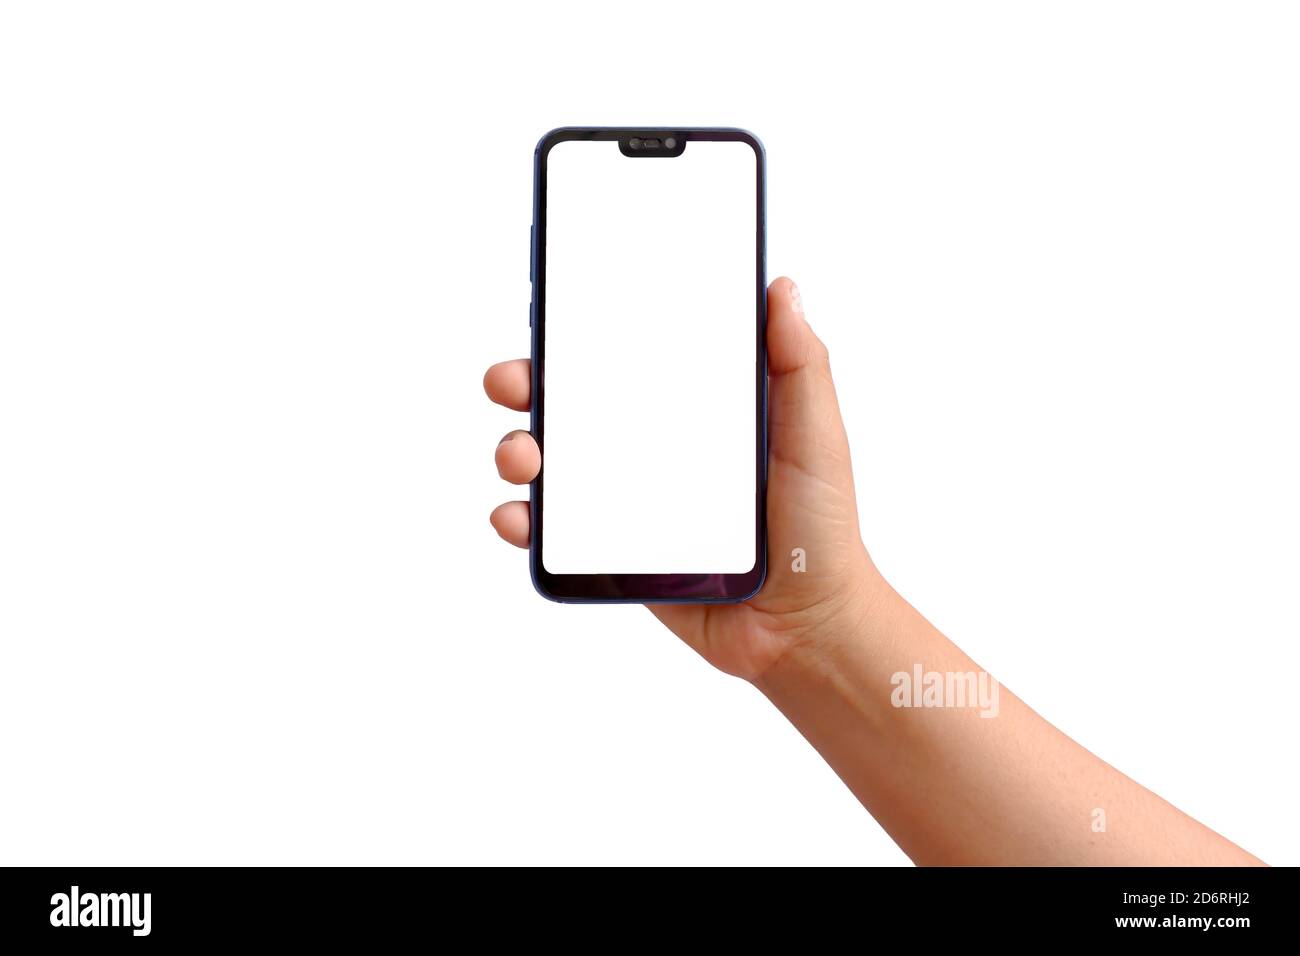 The hand is holding a smartphone with a separate white screen on a white background with the clipping path. Stock Photo